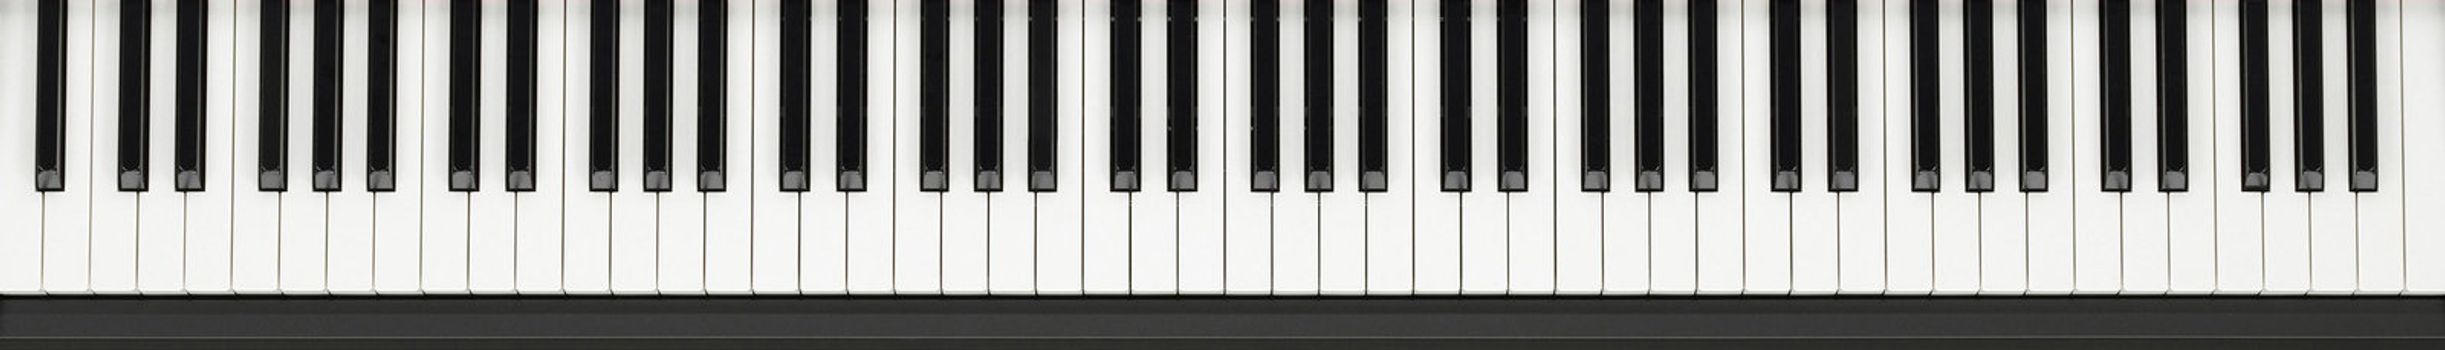 Piano Keyboard can be used as background